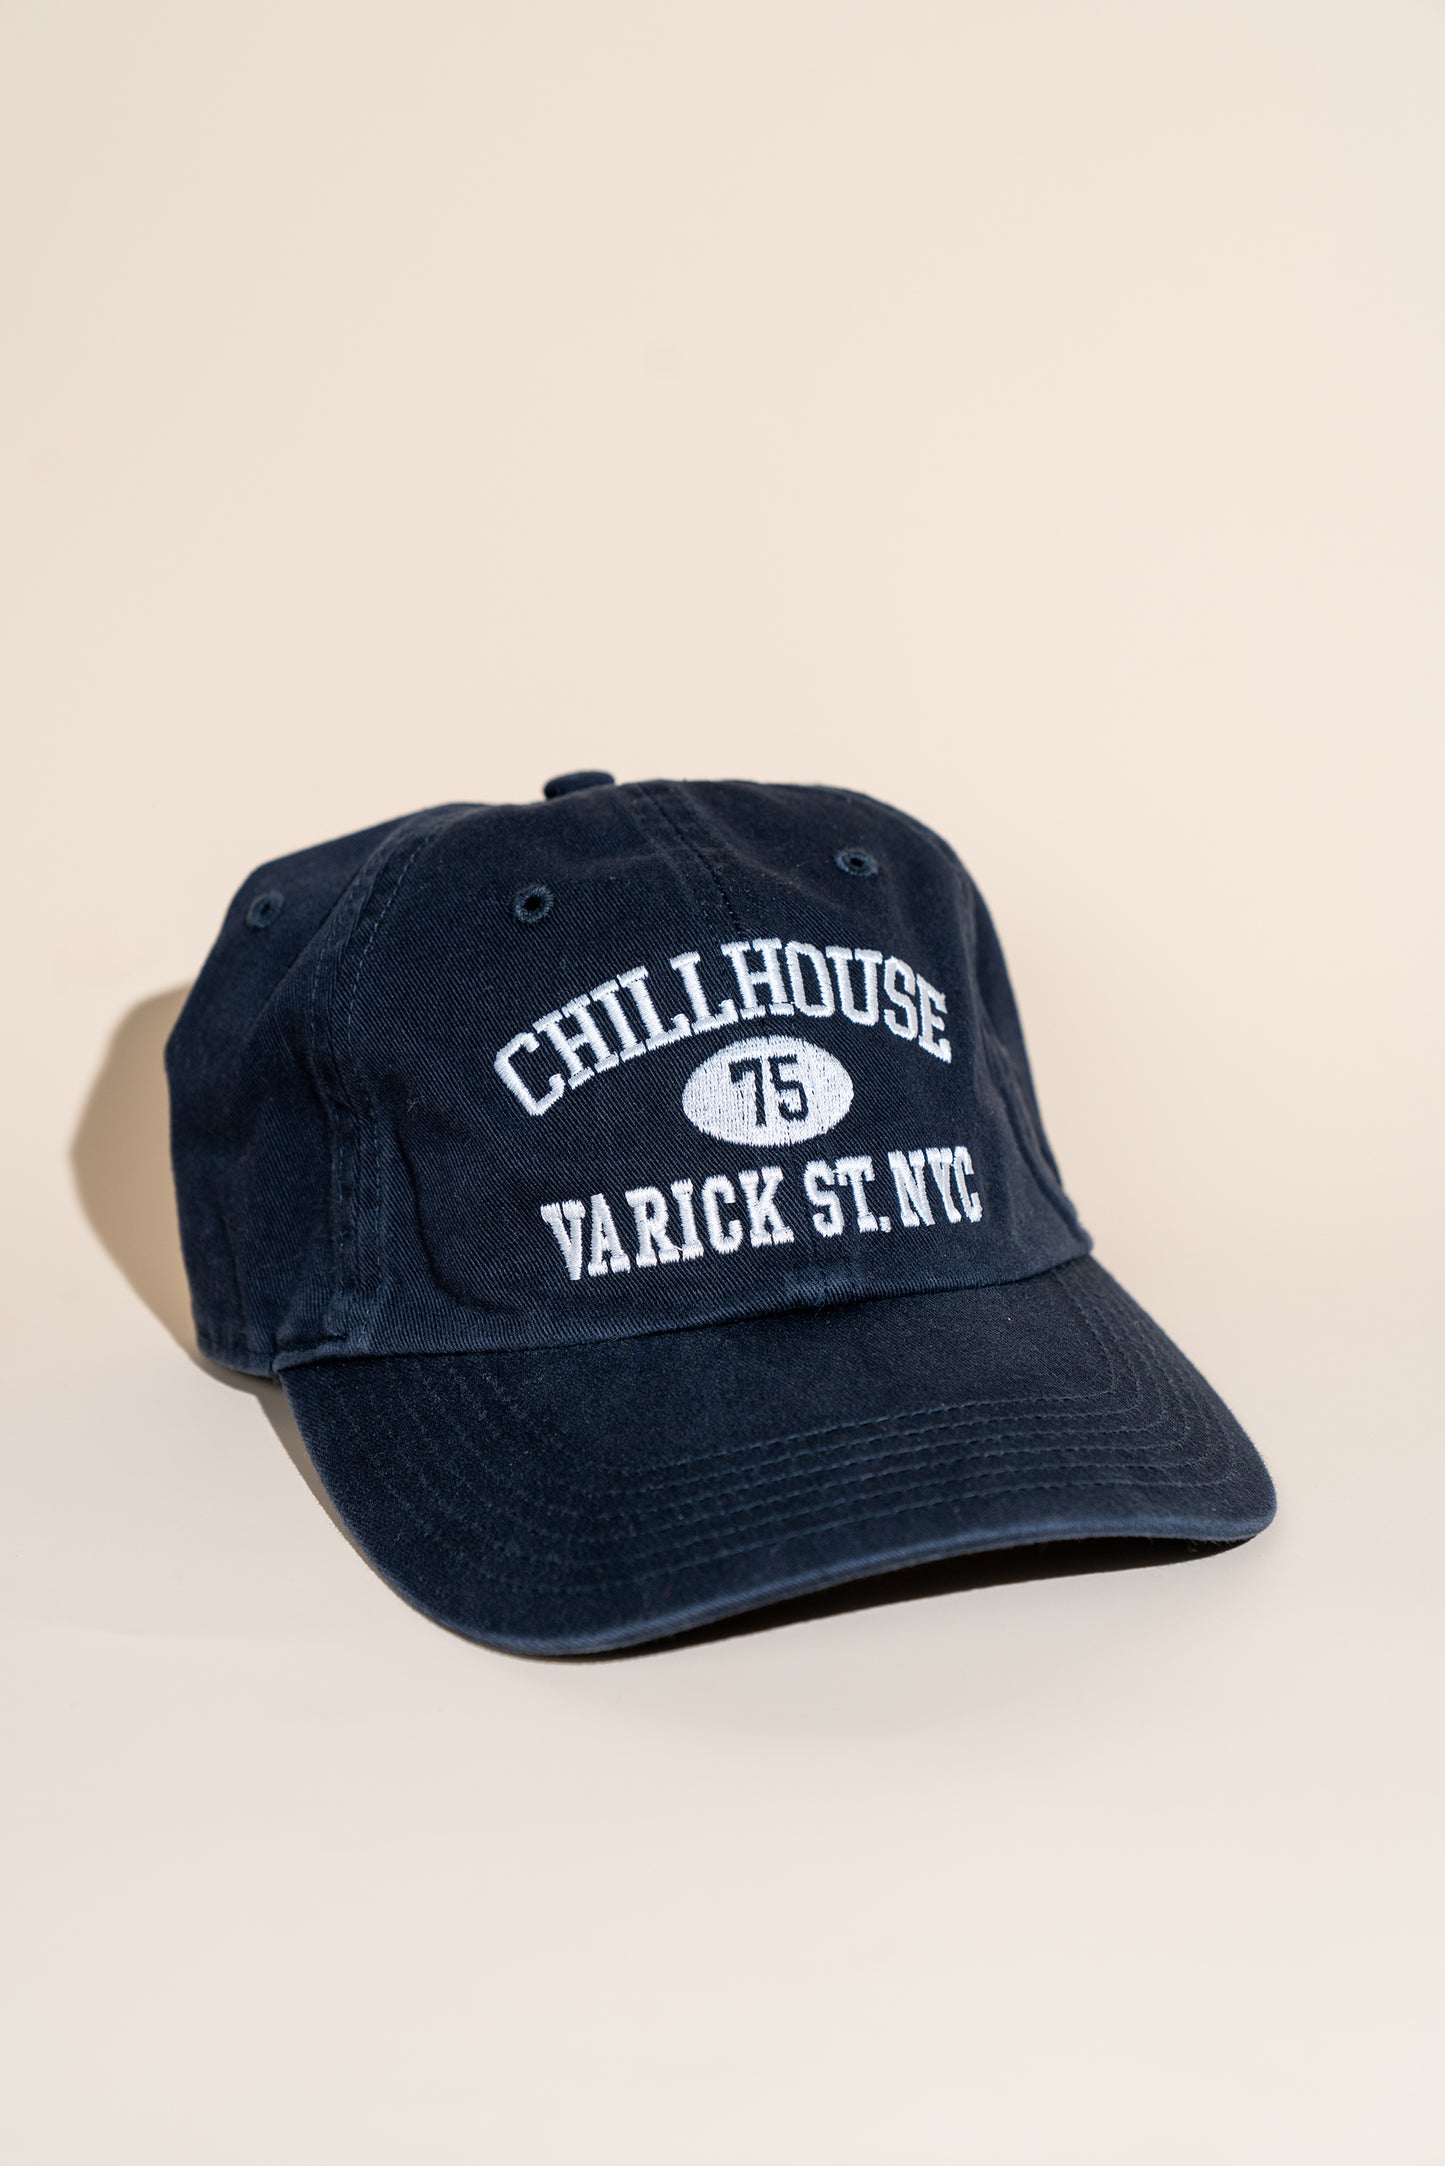 Chilling is My Cardio 75 Varick Hat